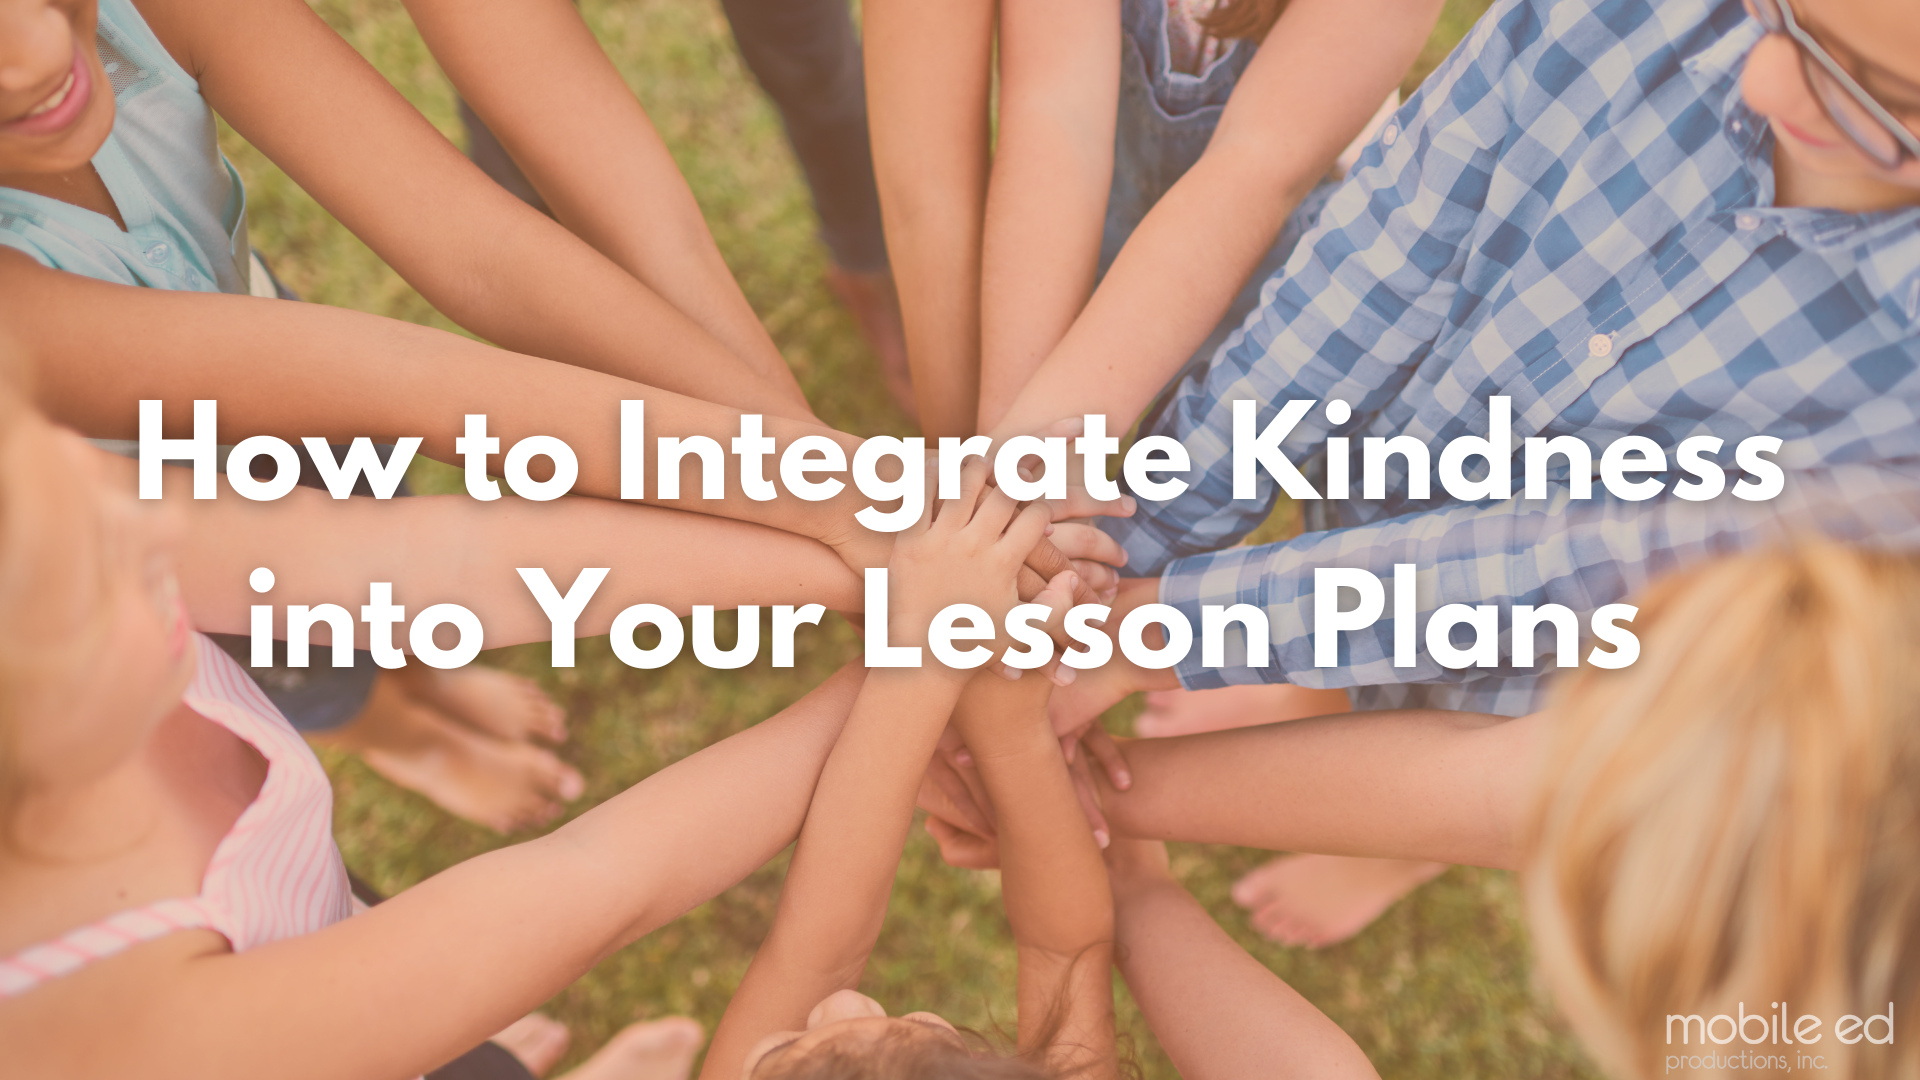 How to Integrate Kindness into Our Lesson Plans